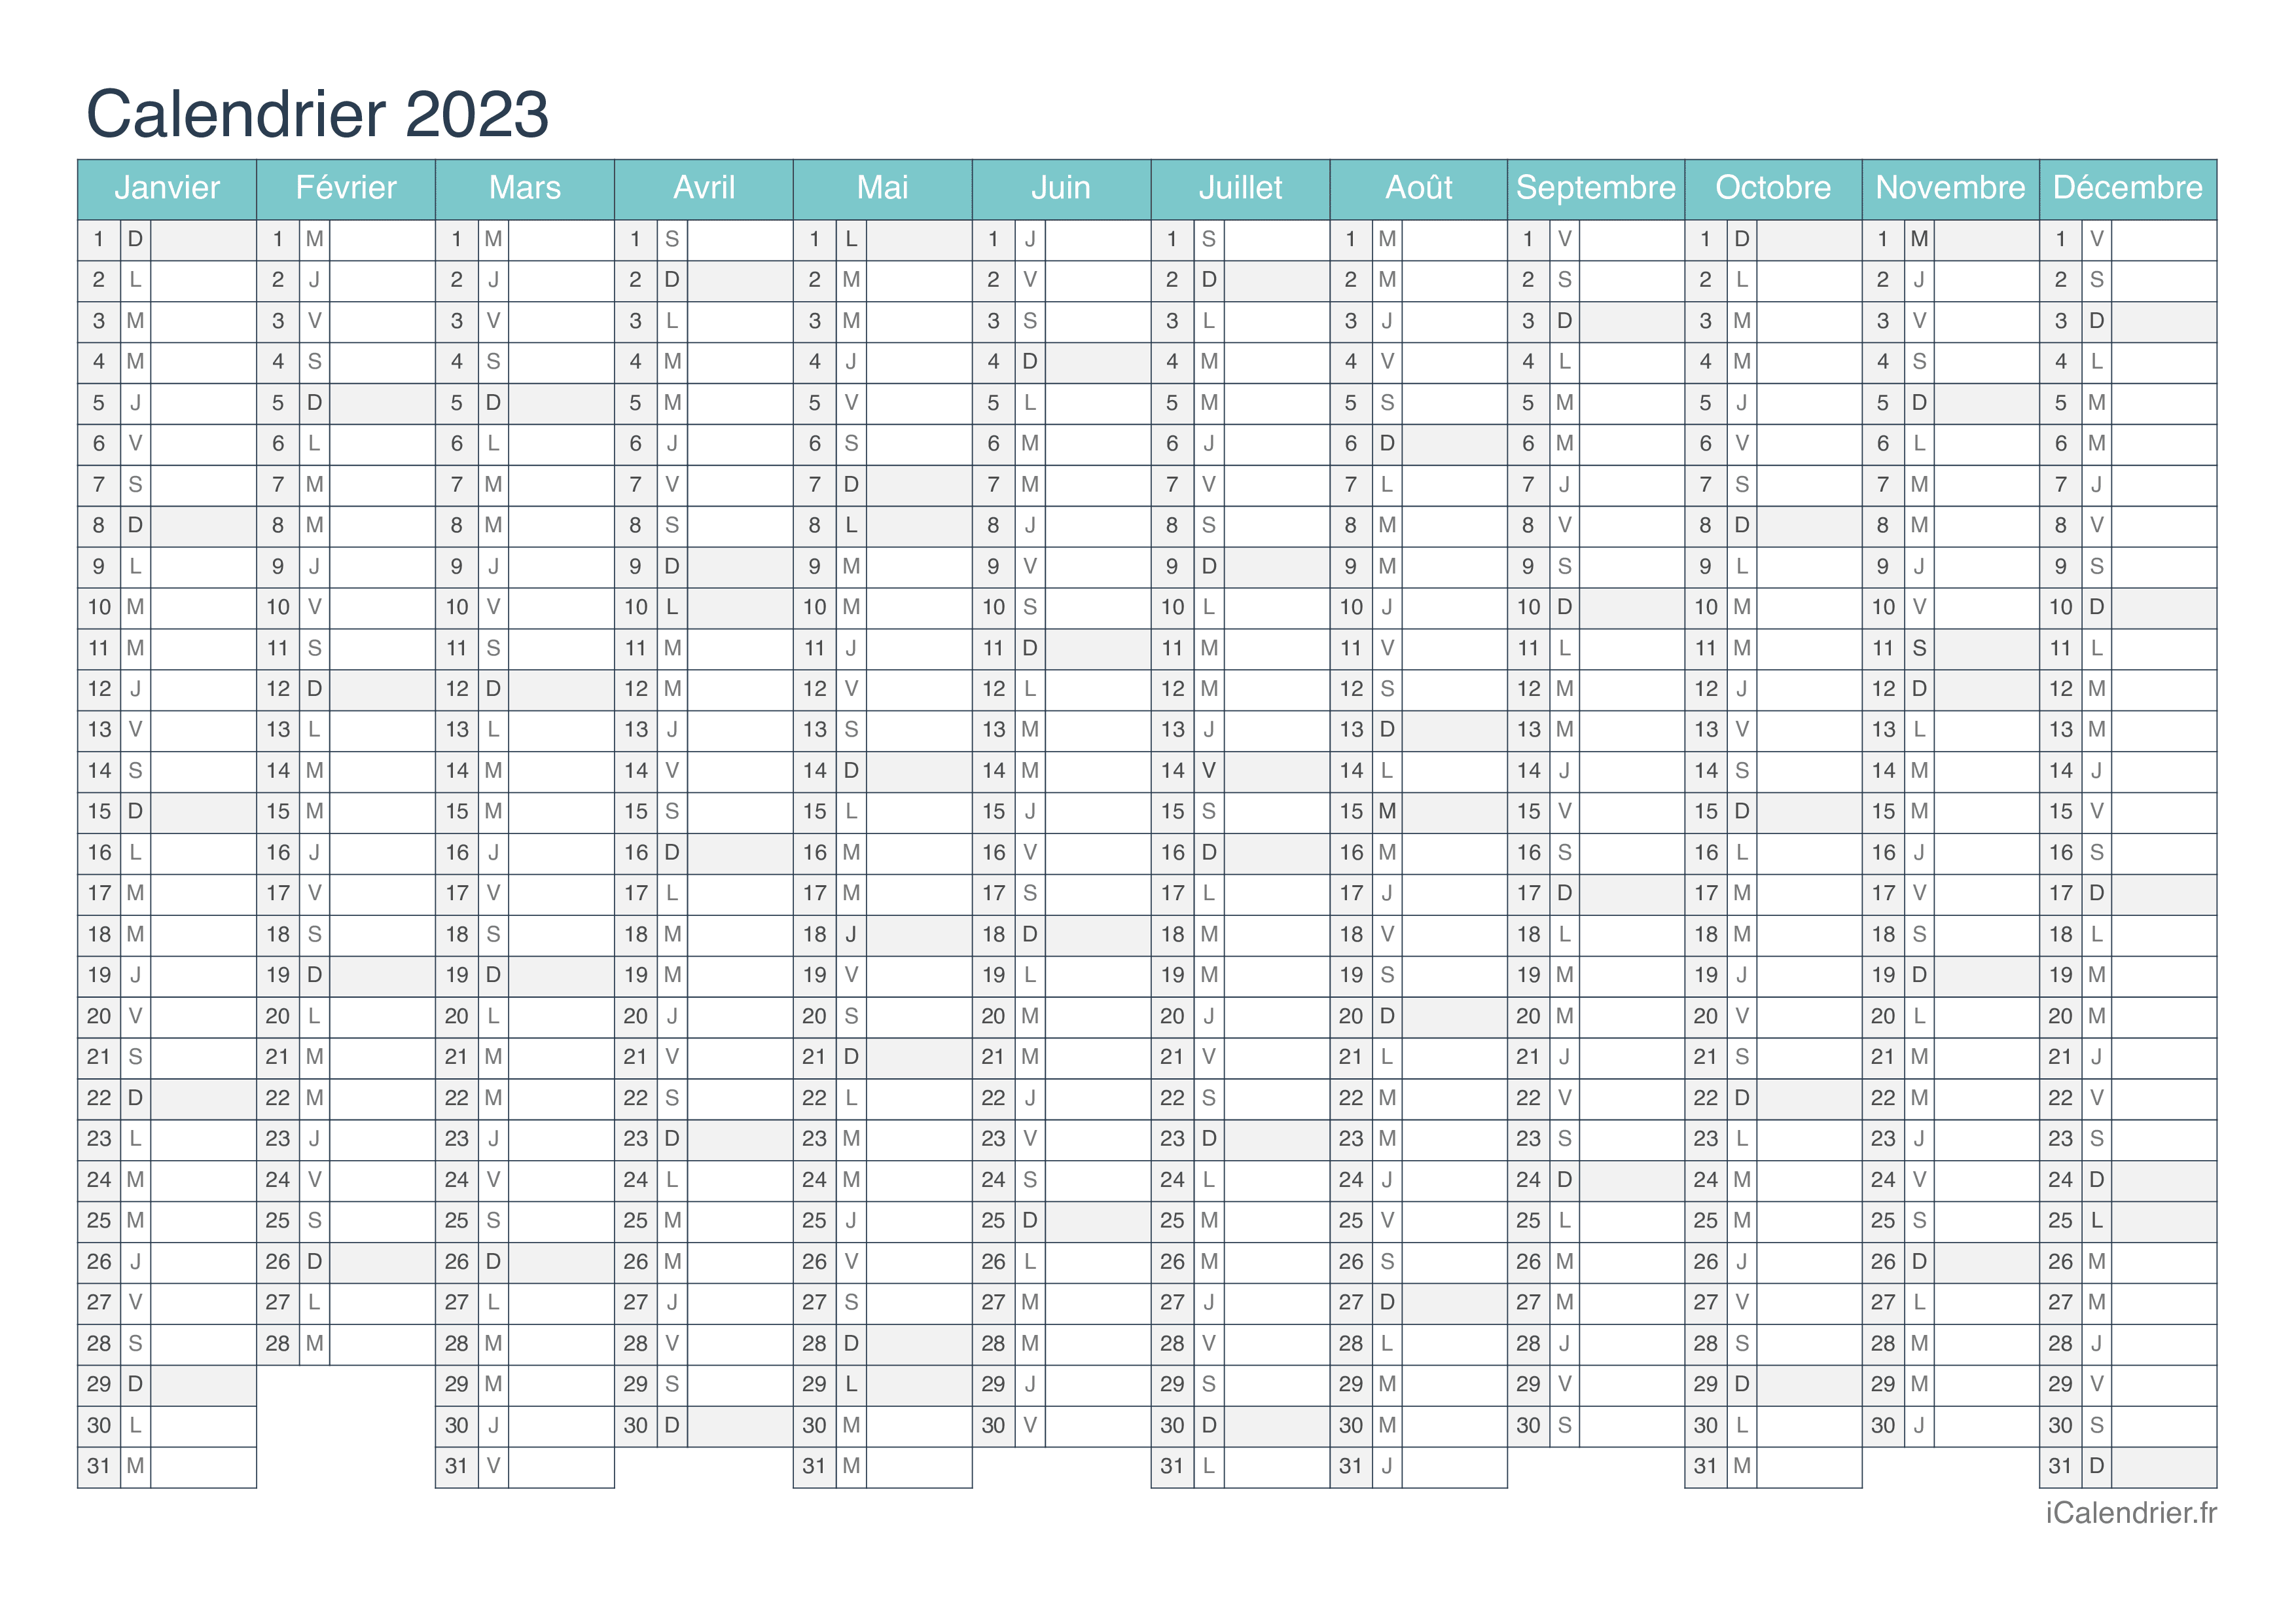 Calendrier 2023 - Turquoise